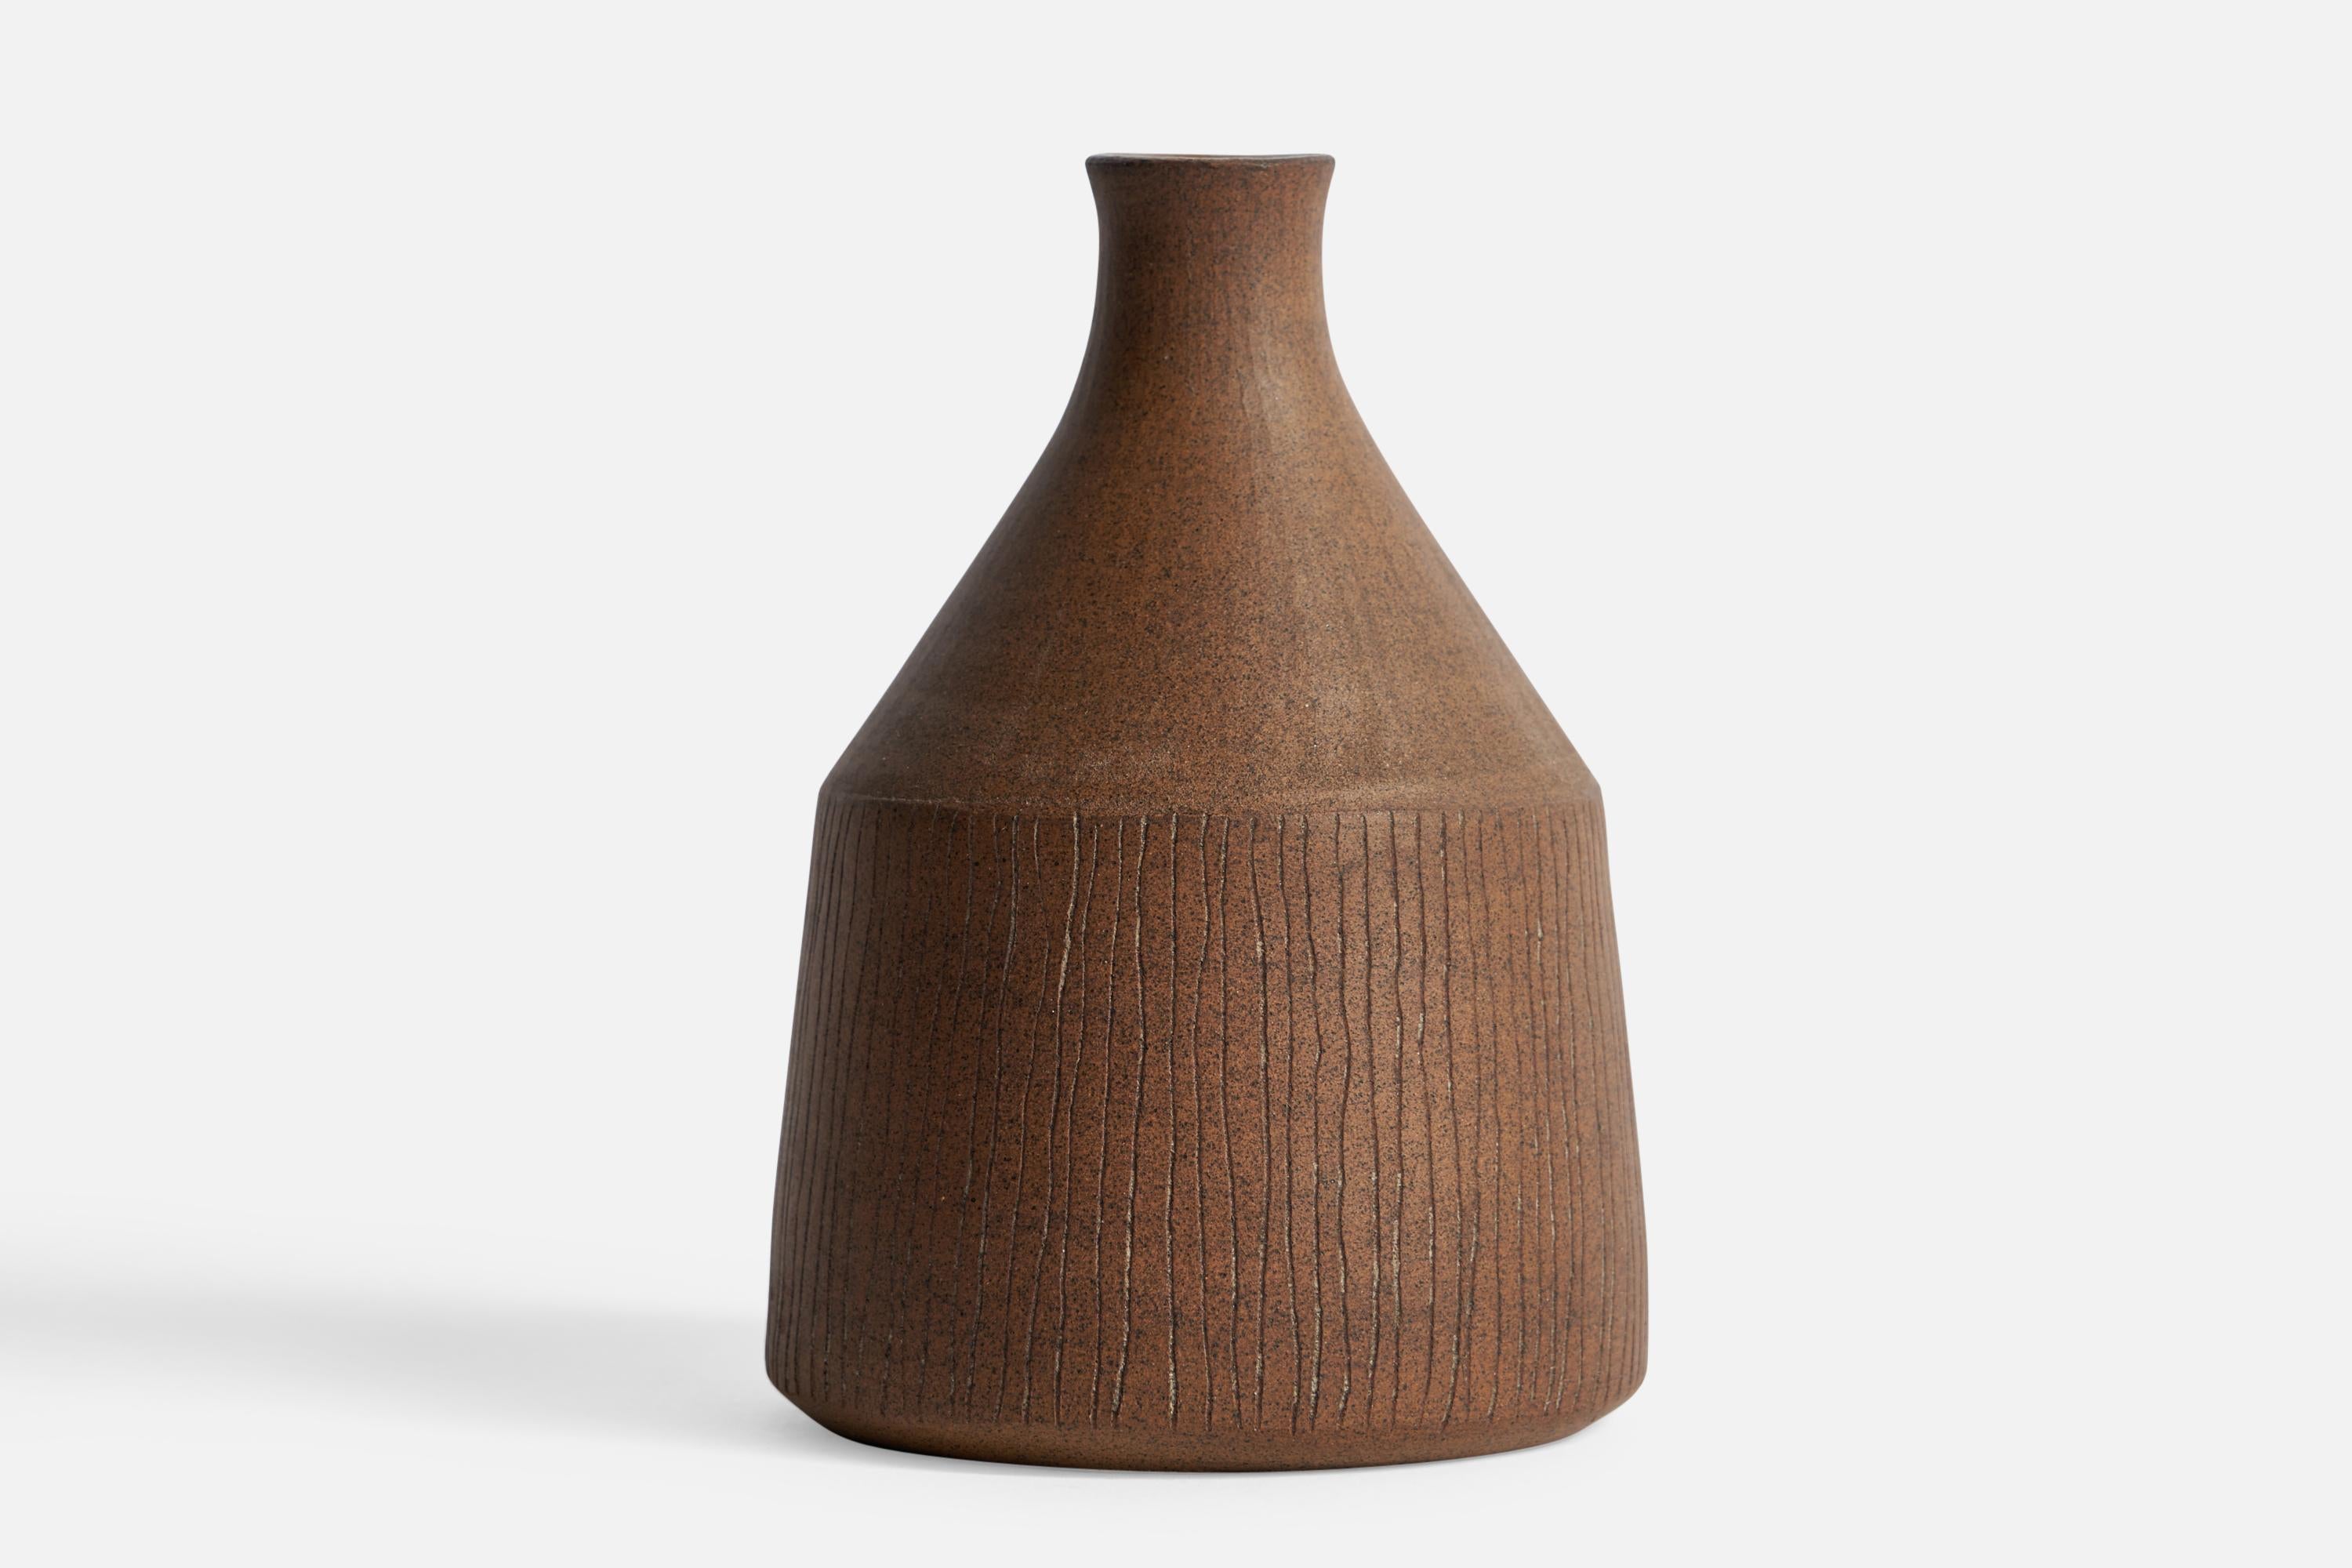 A brown ceramic vase designed and produced by Signe Persson-Melin, Sweden, 1954.